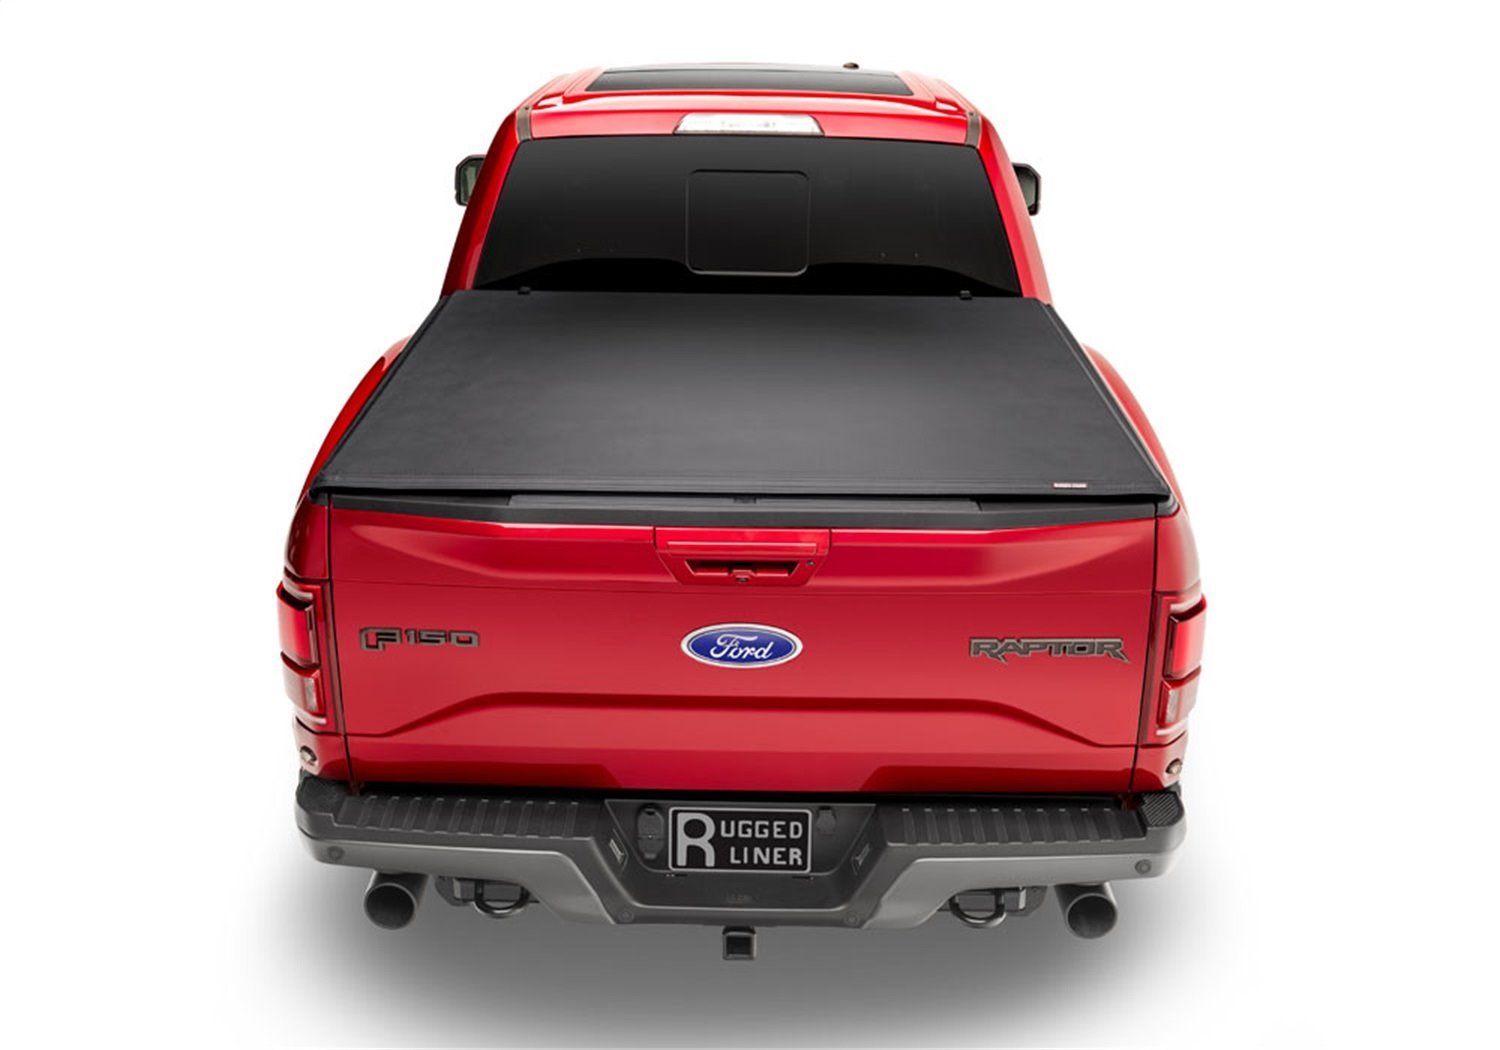 FCF6509TS Premium Soft Folding Tonneau Cover, 2009-14 Ford F-150 (with utility track)